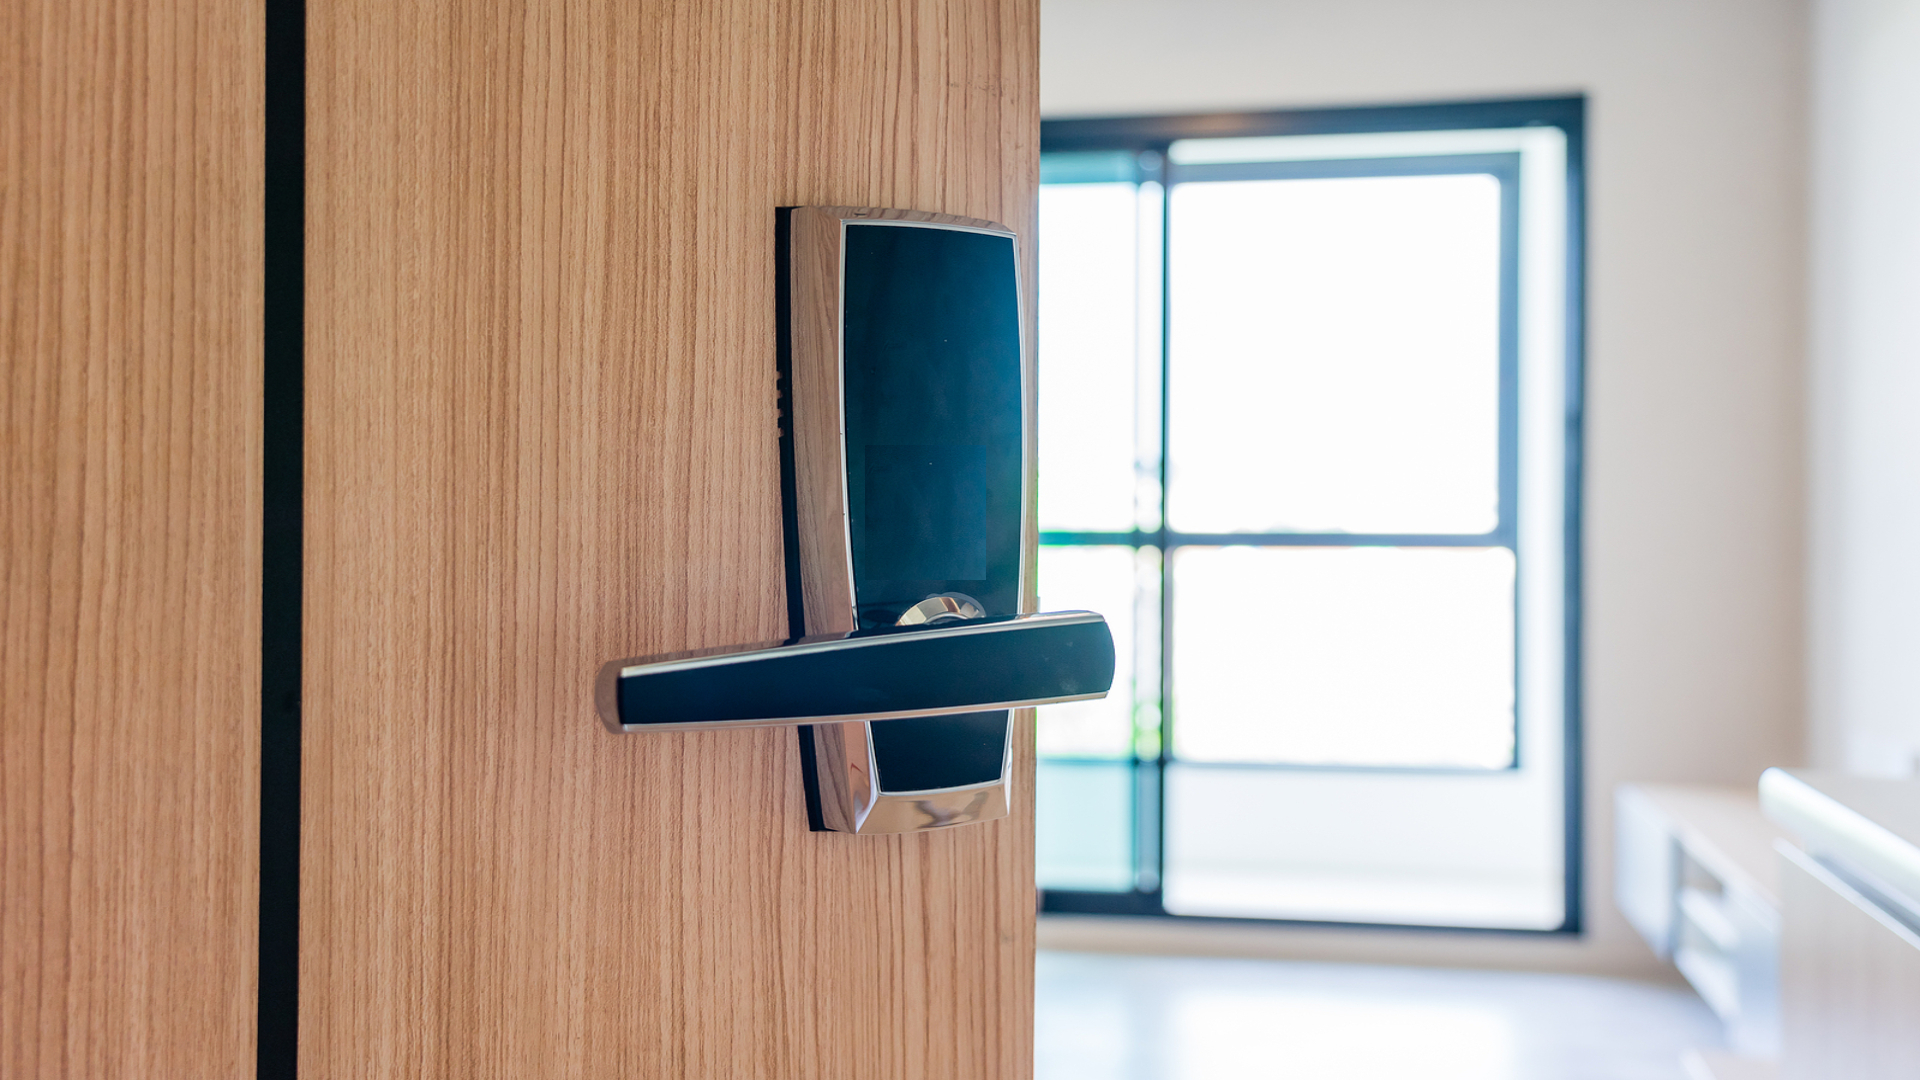 How Does an Access Control System Work?